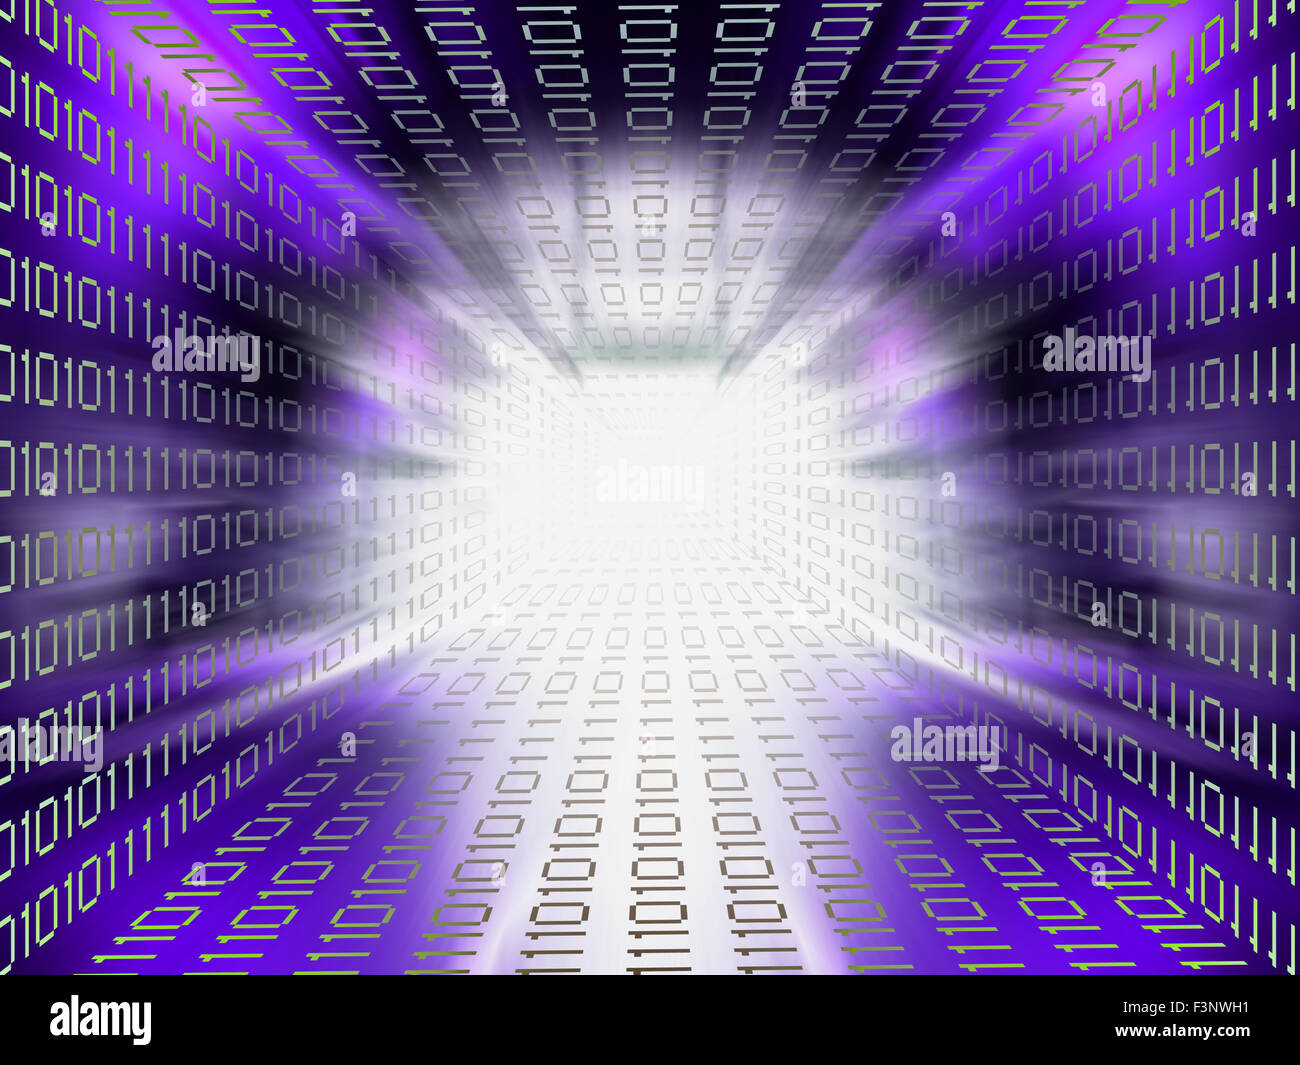 Data channel violet background Stock Photo